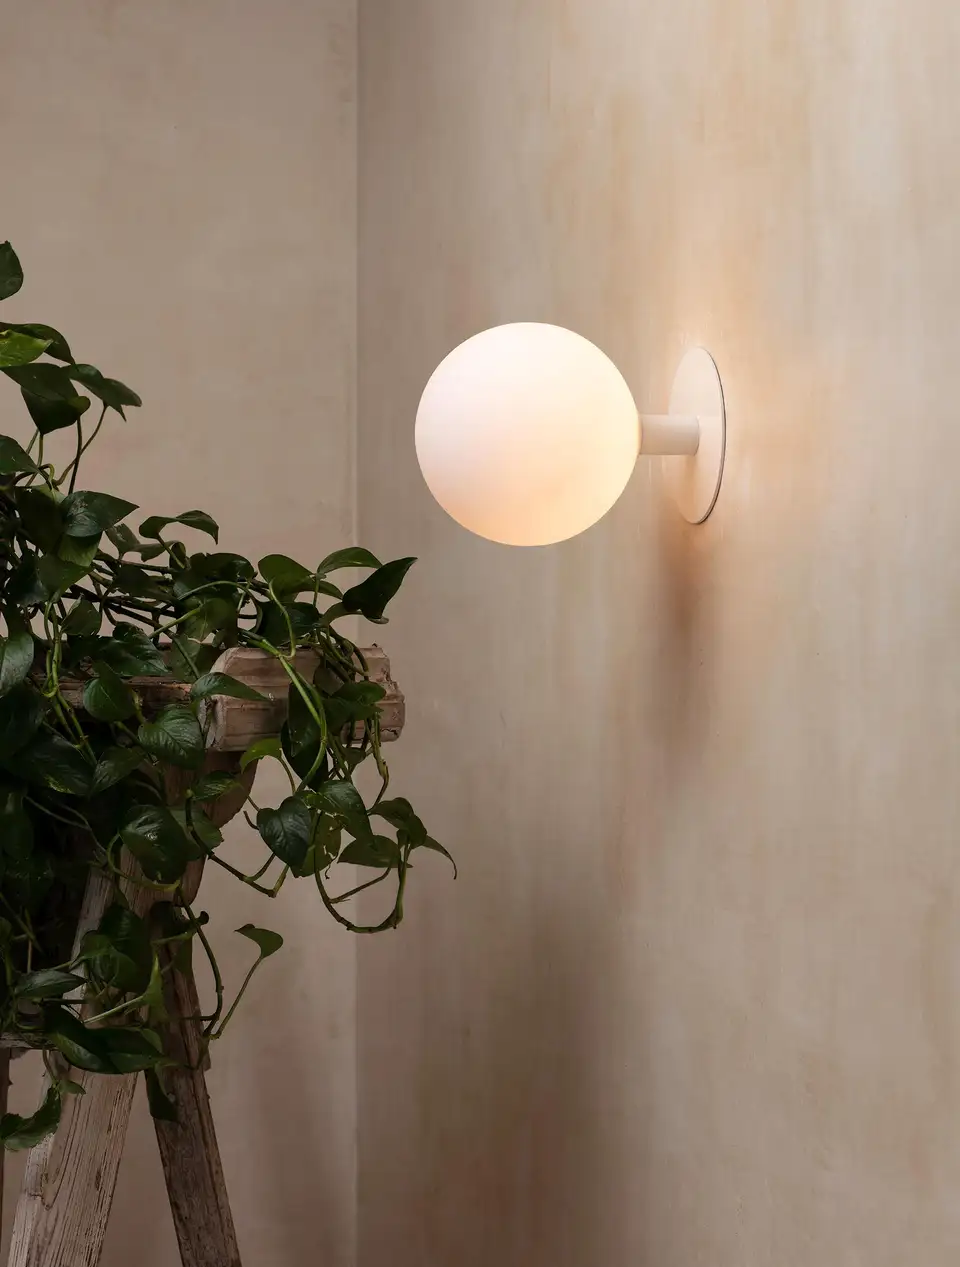 Aspects to factor as you choose globe
lighting